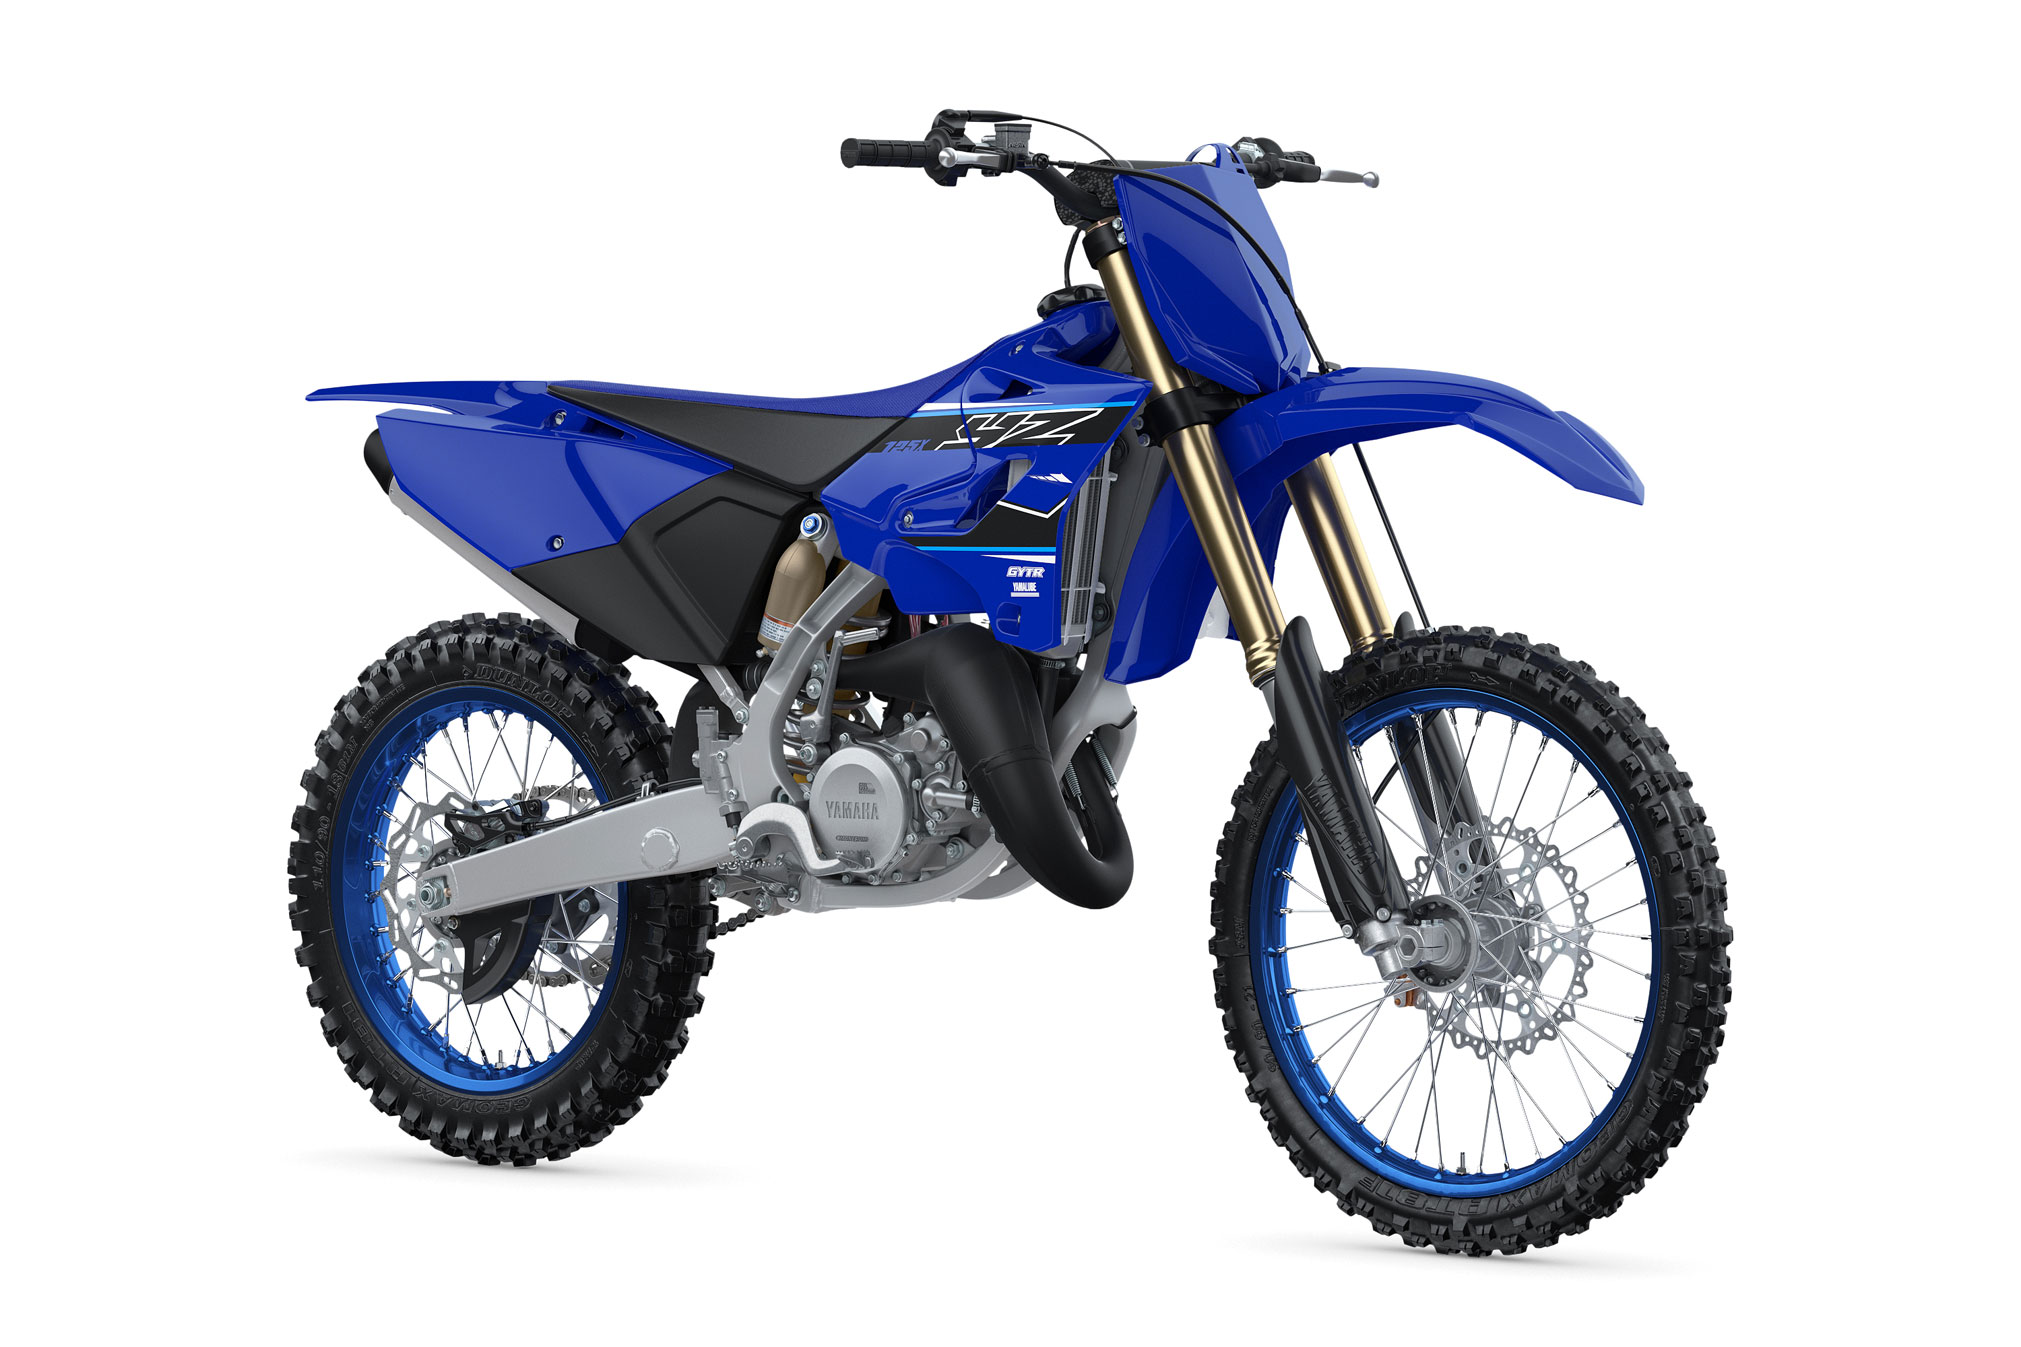 2021 Yamaha YZ125X Guide • Total Motorcycle